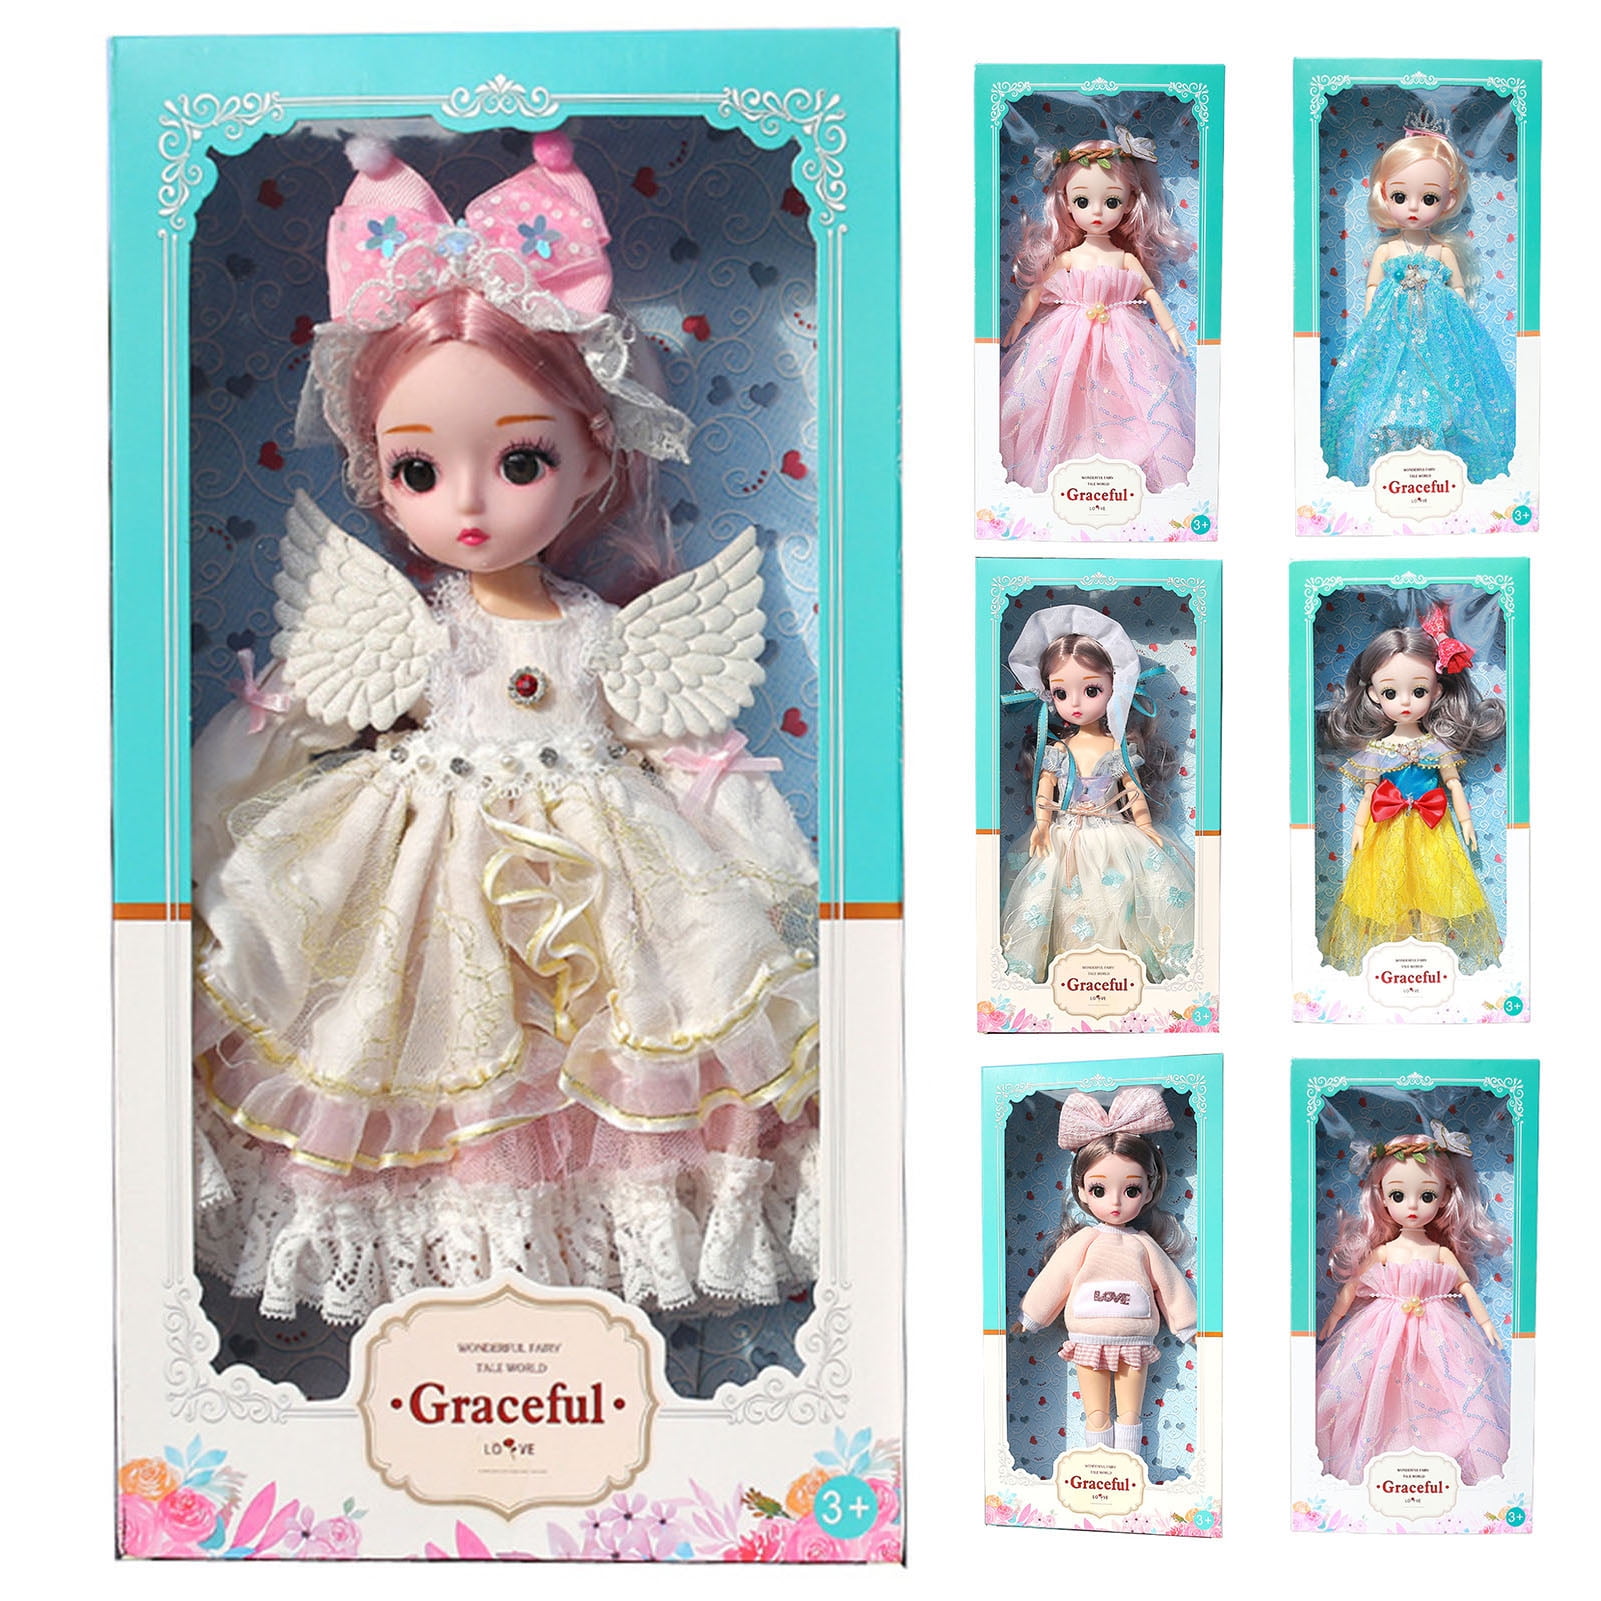 LOL Surprise Doll MS MISS BABY Series 1 Authentic Dolls sd